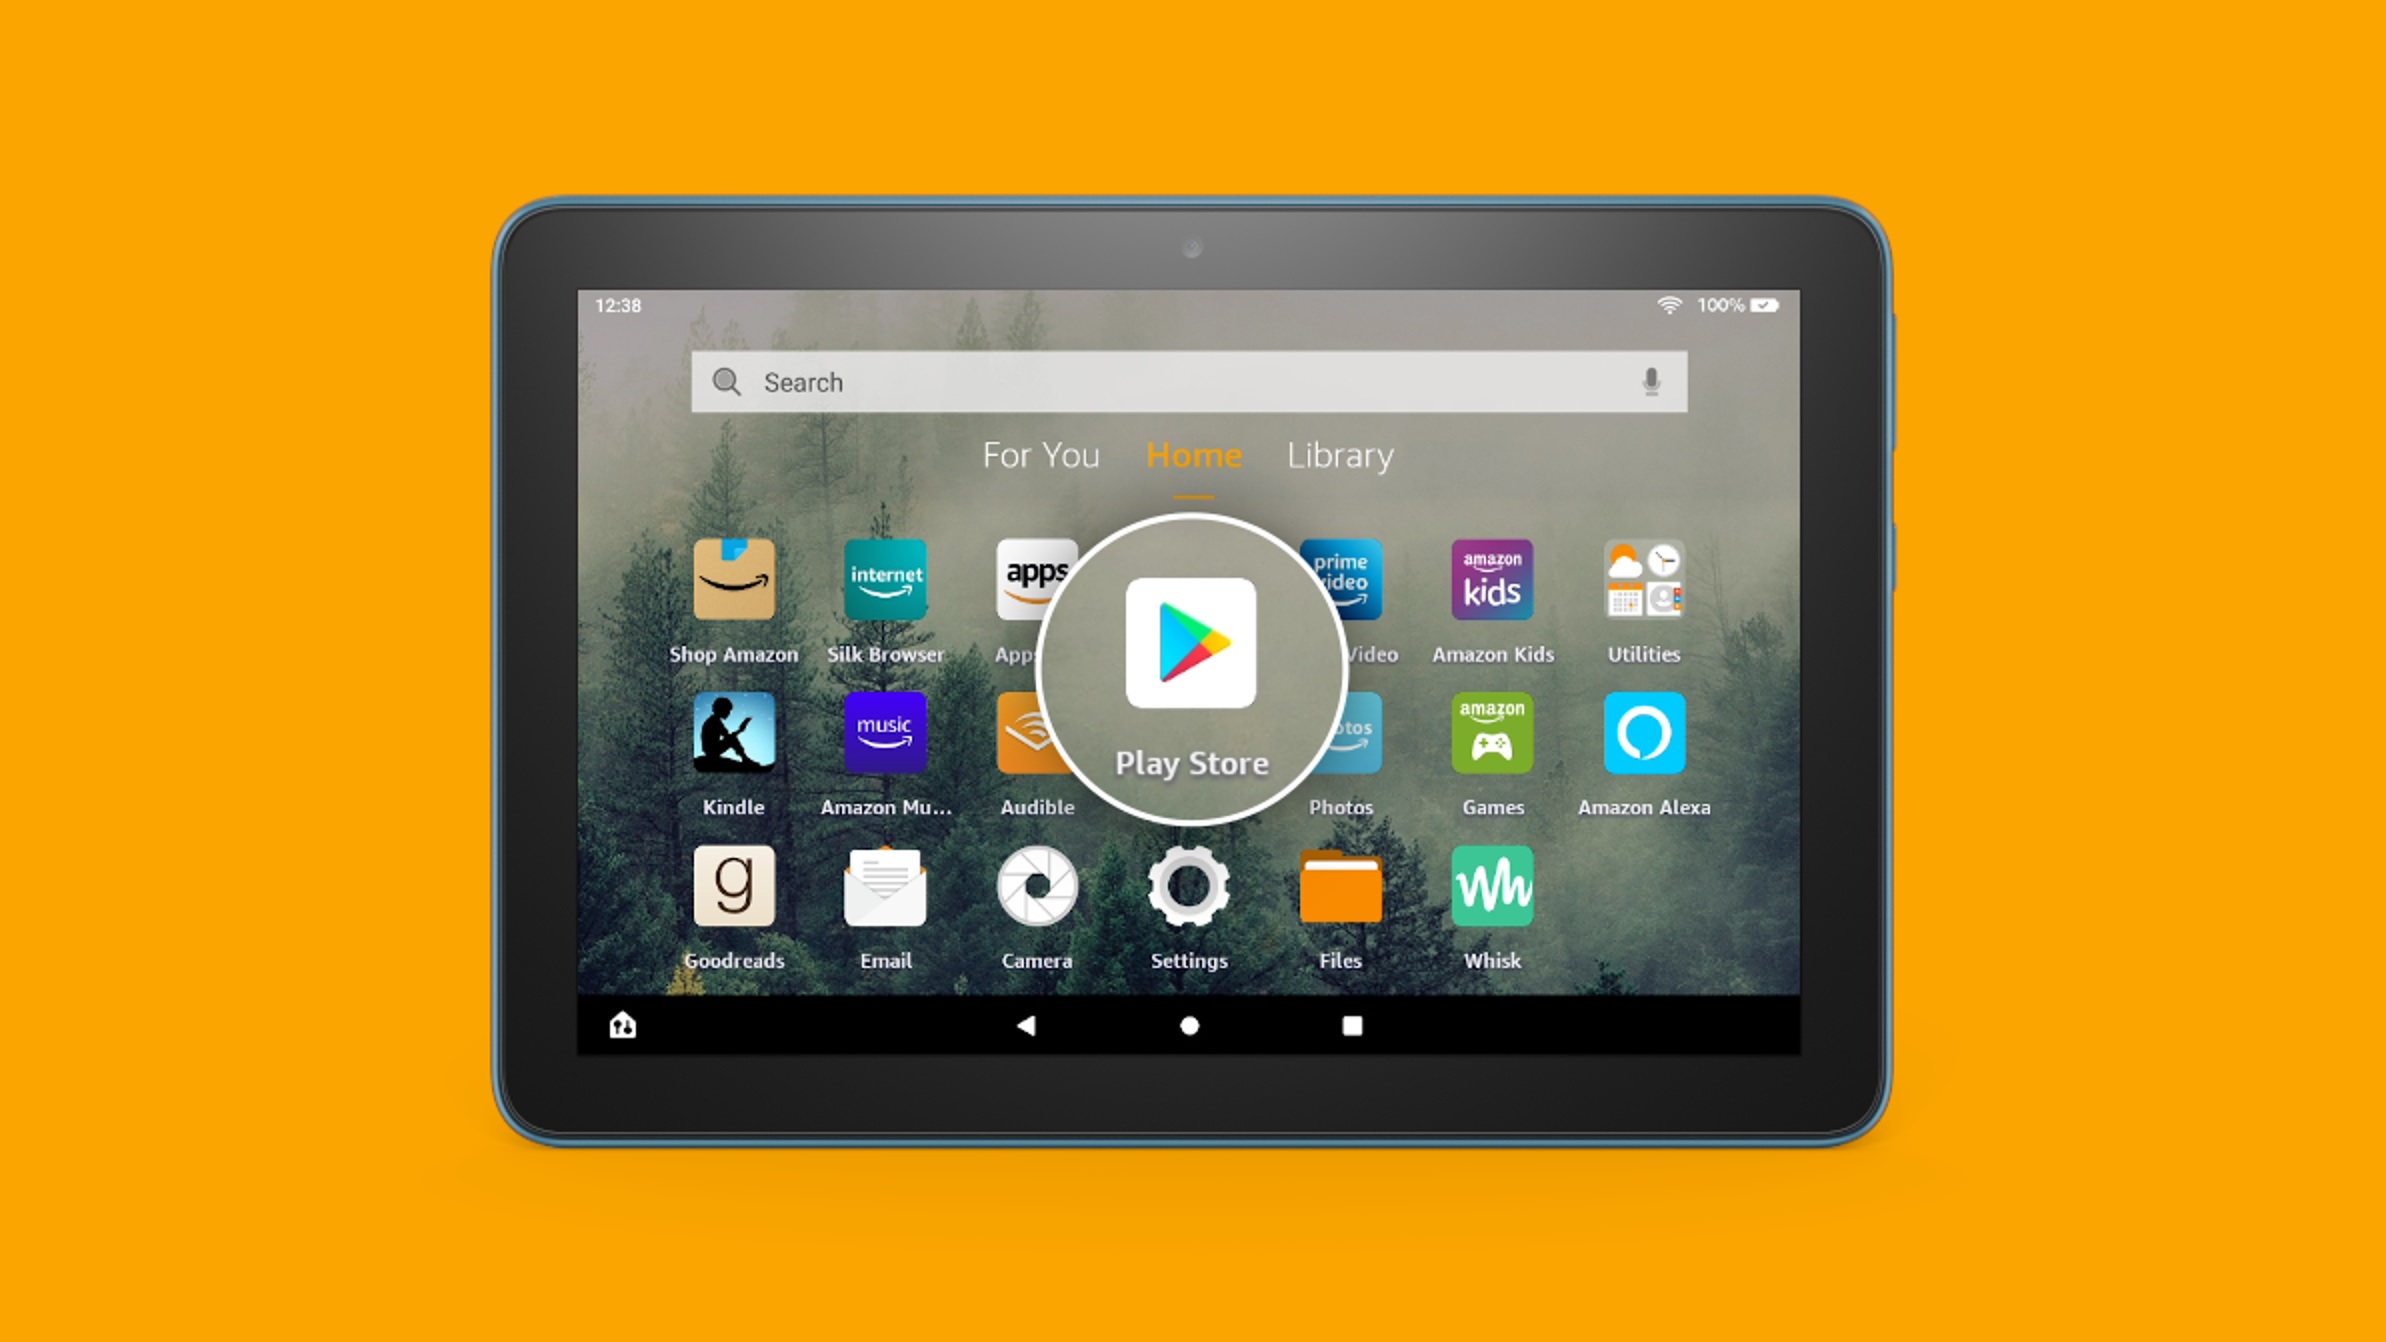 How to Install the Google Play Store on an Amazon Fire?